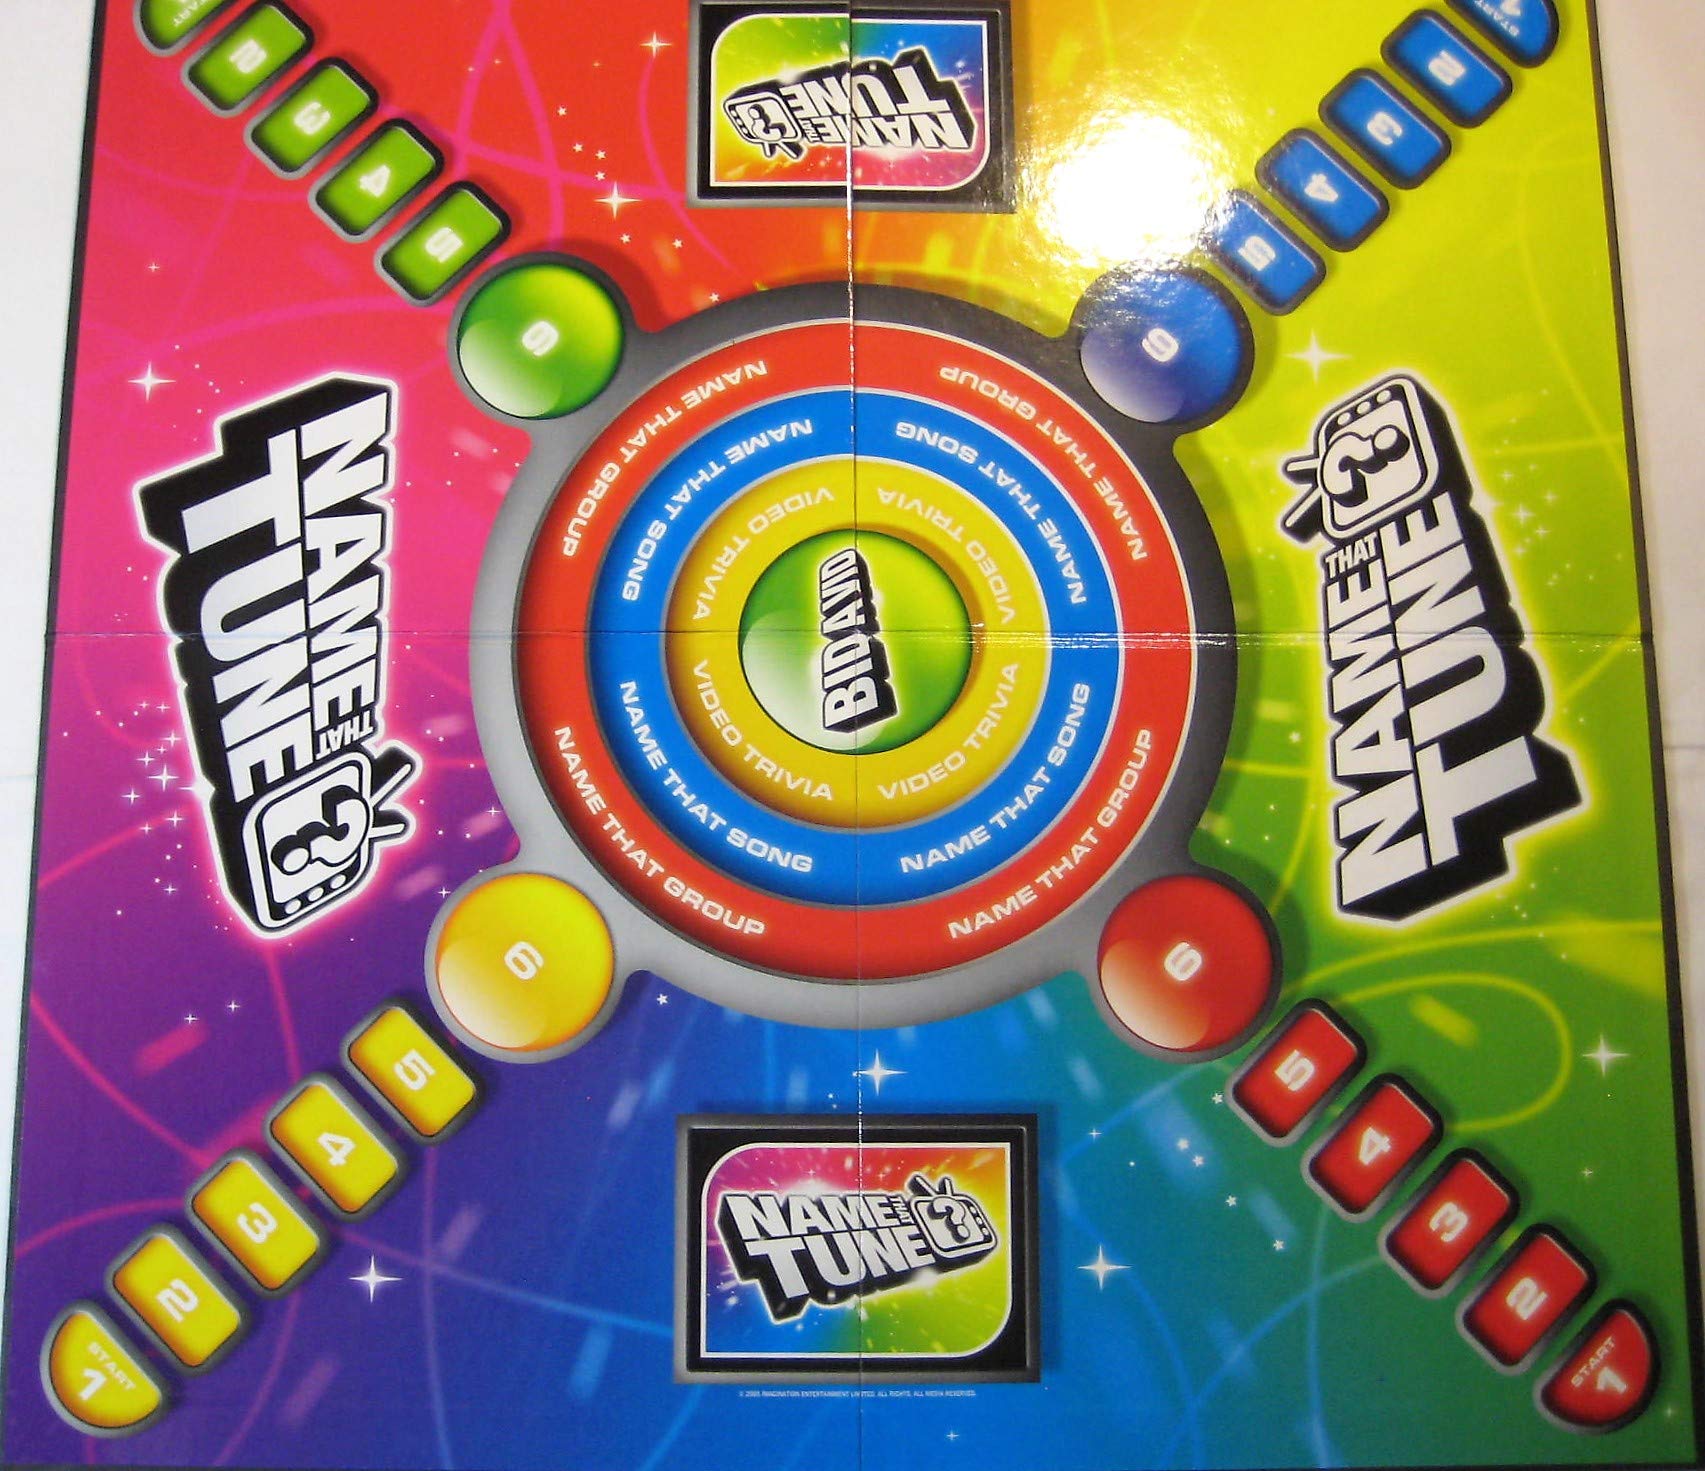 Name That Tune DVD Board Game - 80s Edition by Imagination